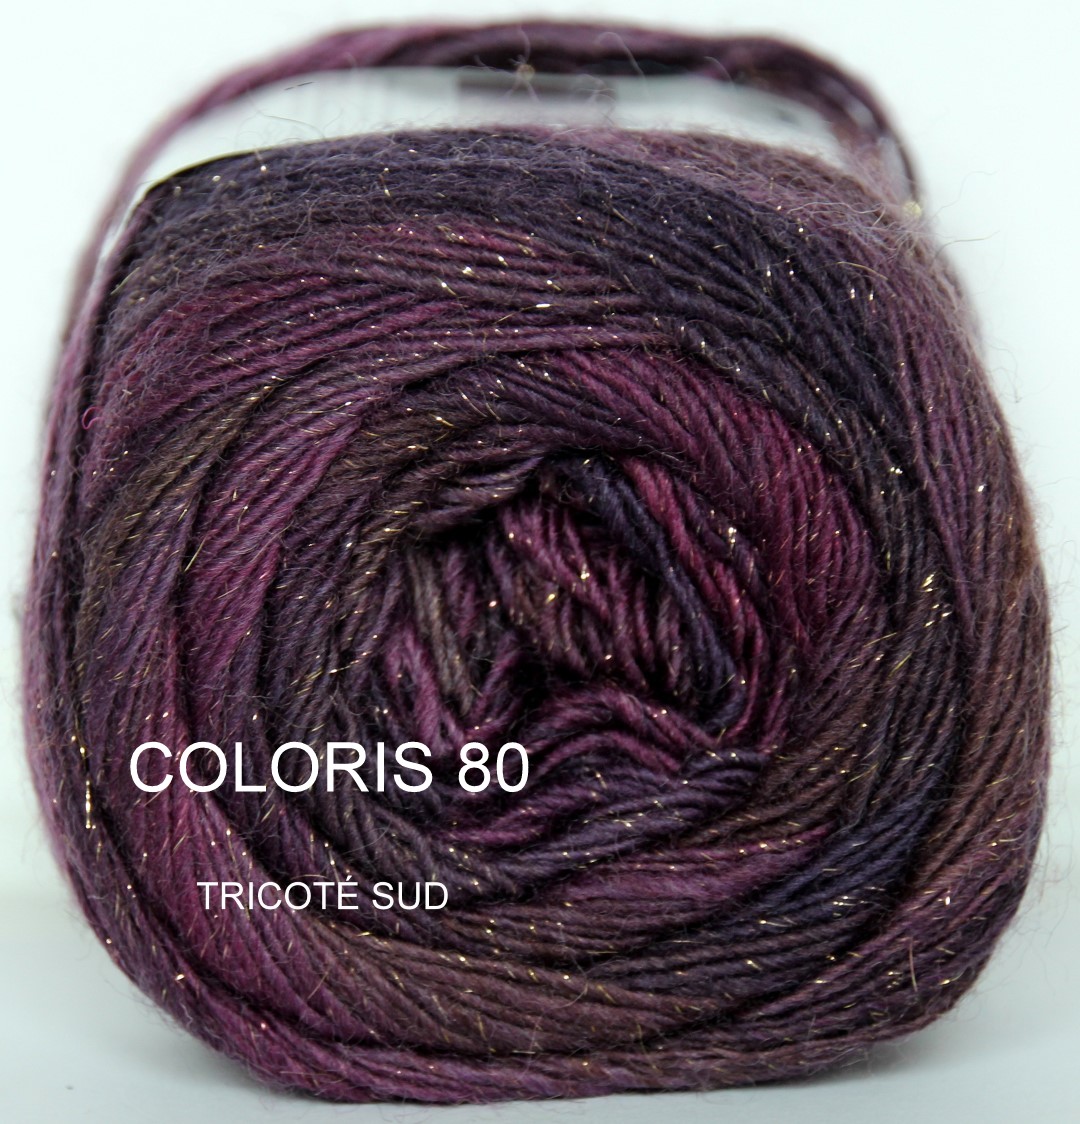 MILLE COLORI SOCKS AND LACE LUXE COLORIS 80 (2) (Large)